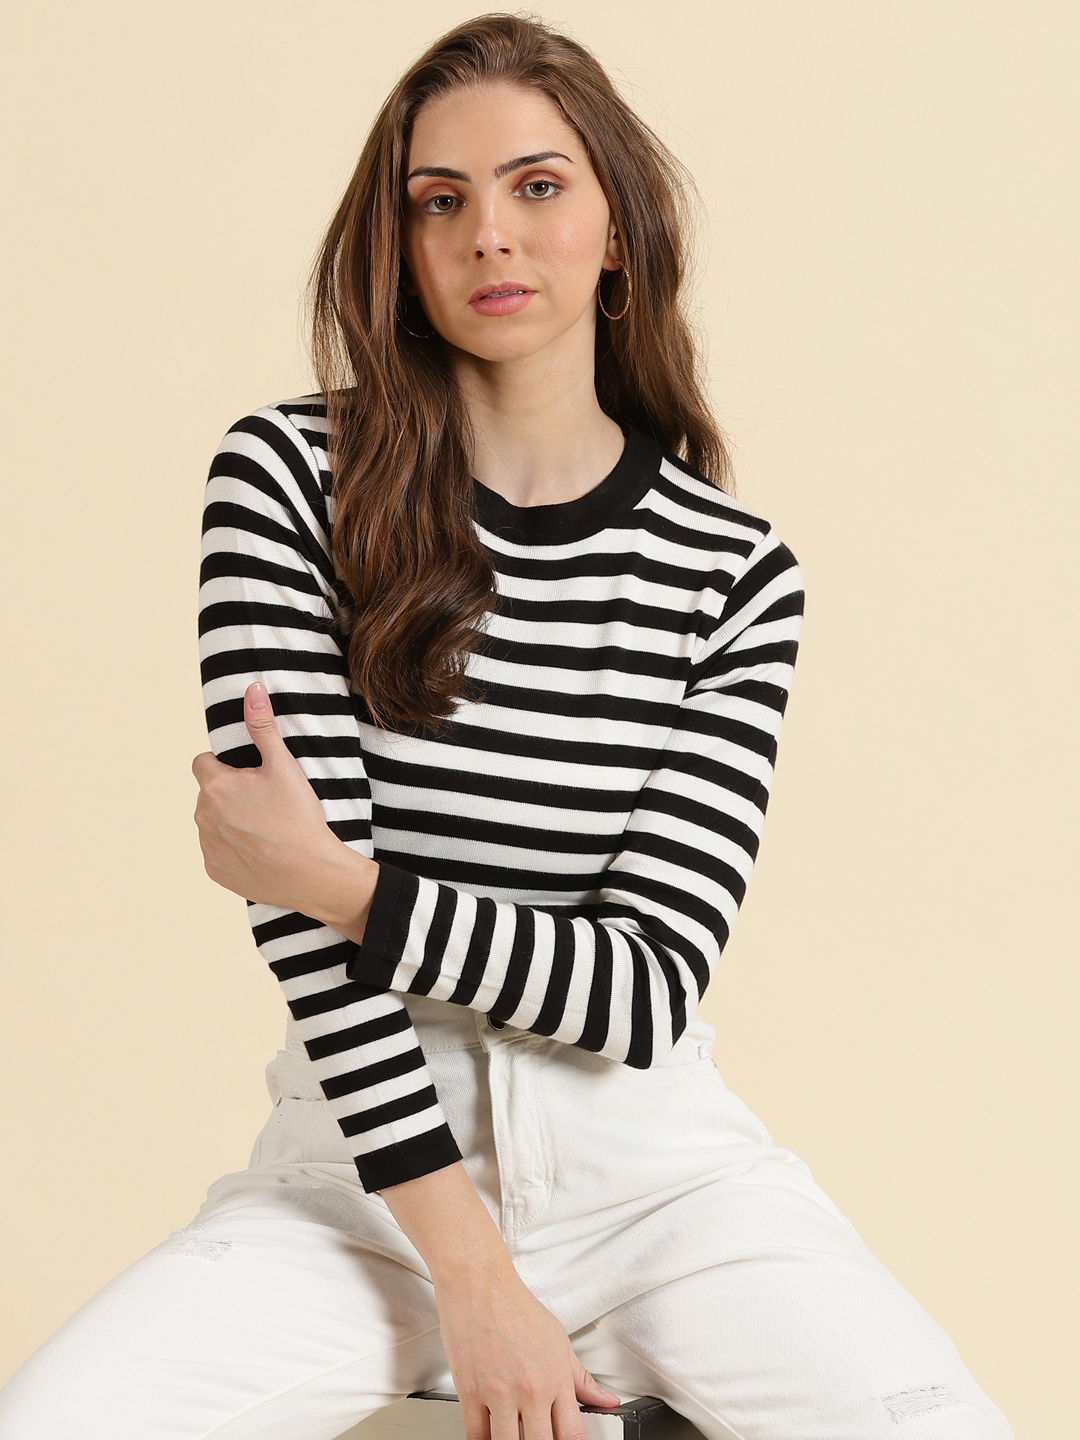 Showoff | SHOWOFF Women's Round Neck Striped Black Fitted Regular Top 0